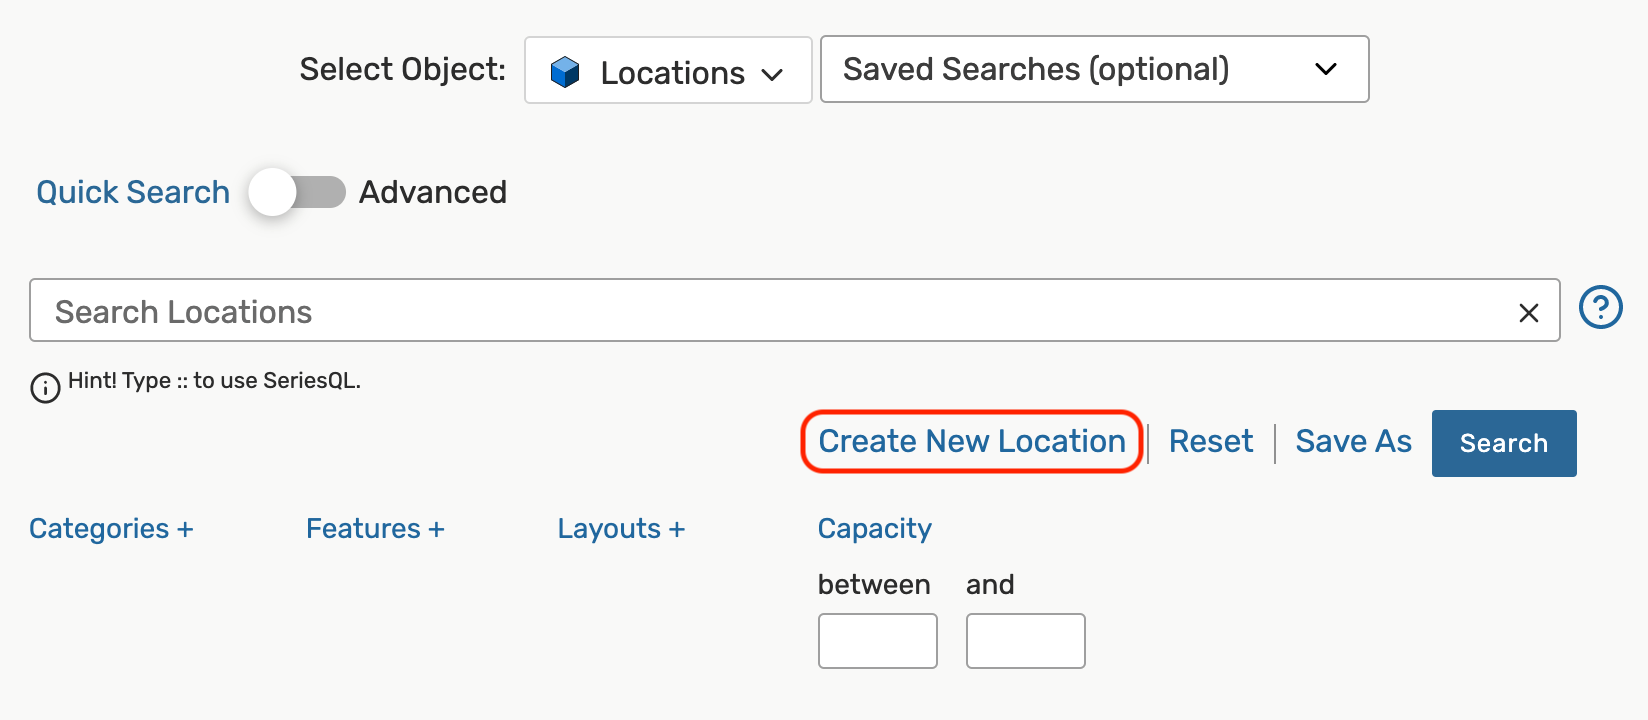 Create new location button below the location search